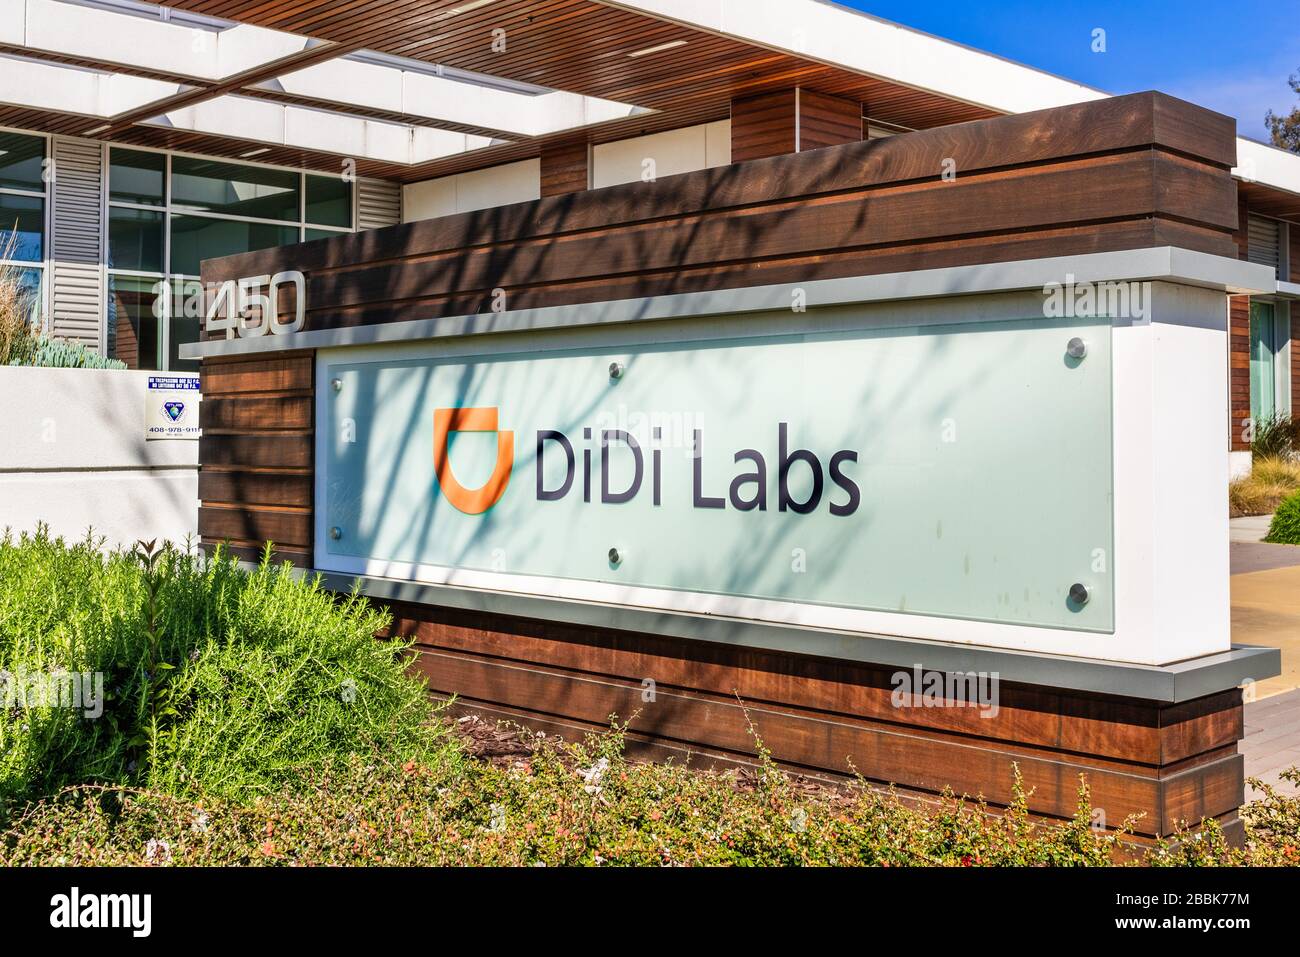 Mar 30, 2020 Mountain View / CA / USA - DiDi Labs offices in Silicon Valley; Didi Chuxing Technology Co. is a Chinese company providing app-based tran Stock Photo